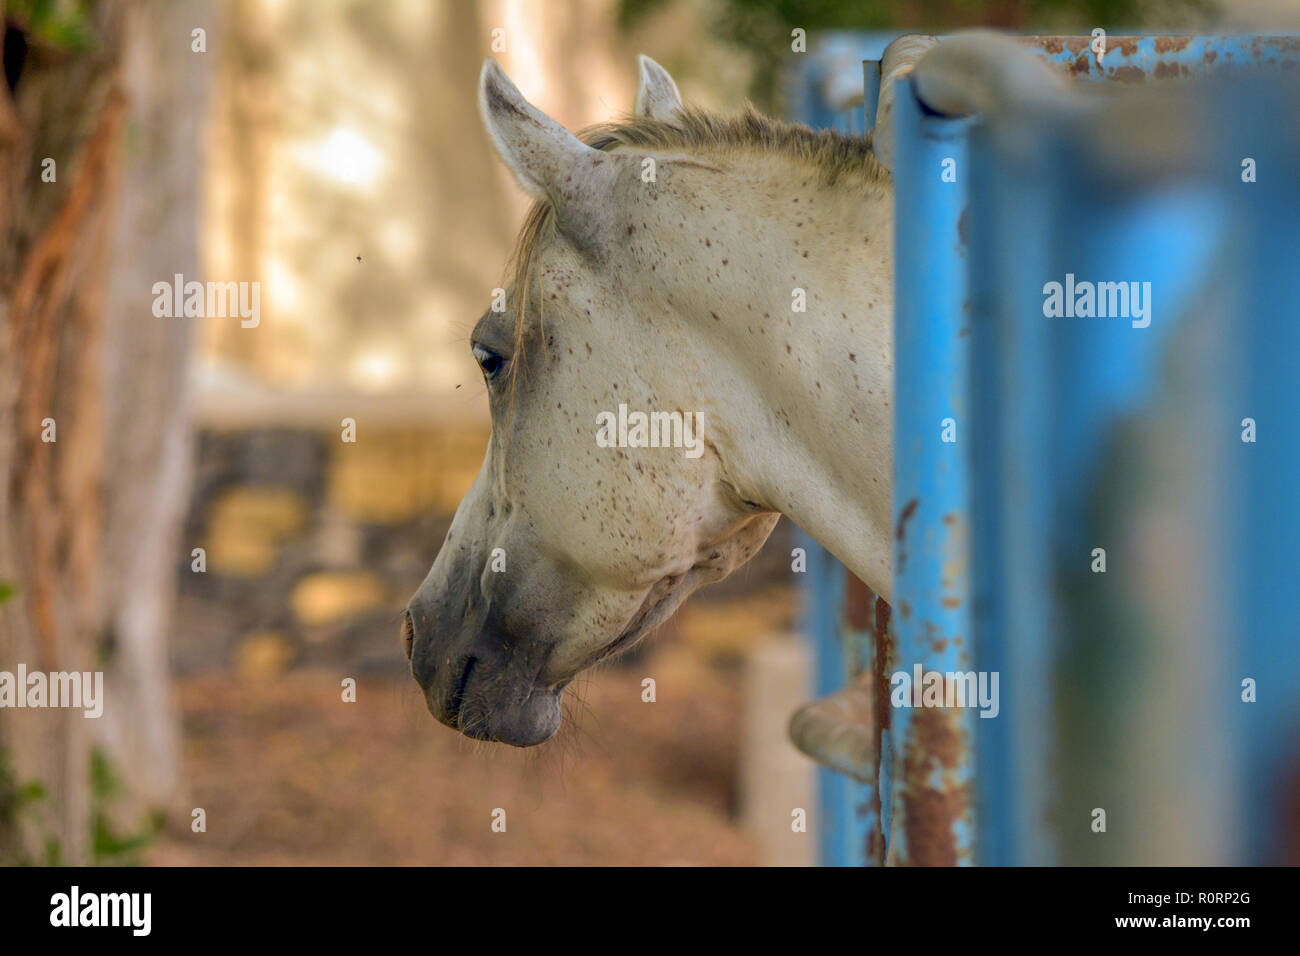 Horse in cage Stock Photo